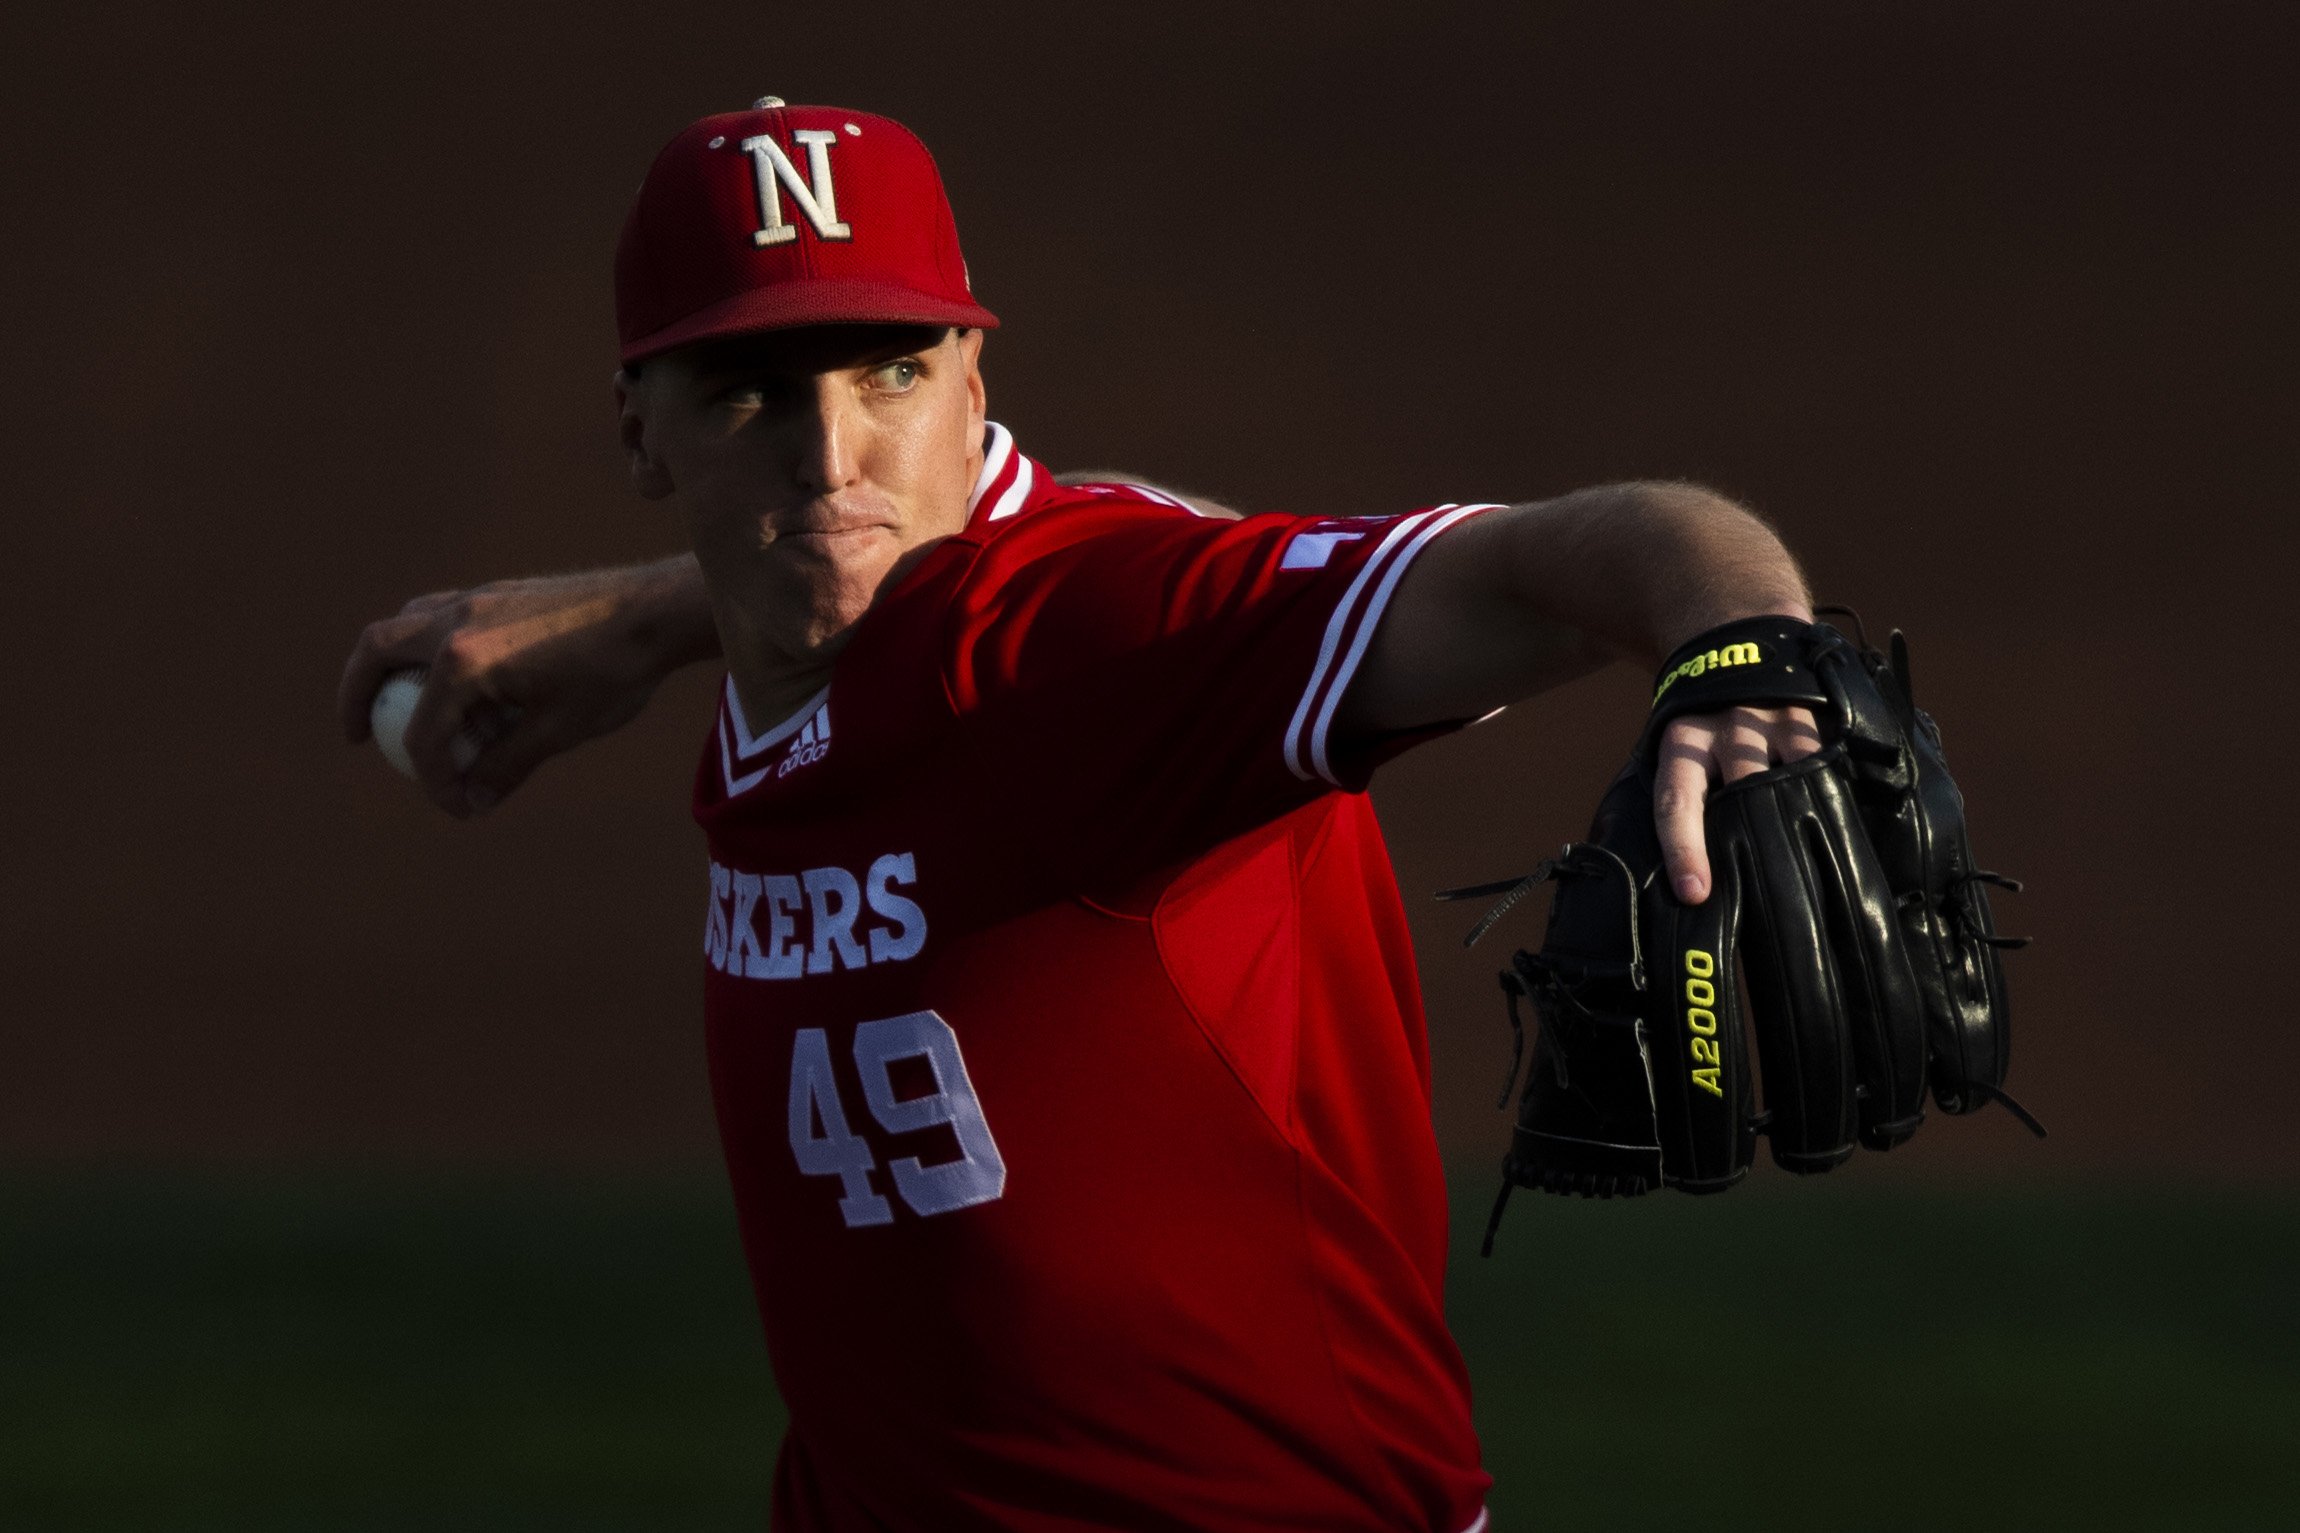  A dying ray of light catches Nebraska starting pitcher Dawson McCarville as he pitches against Omaha during the first inning at Haymarket on April 27, 2022, in Lincoln, Nebraska. KENNETH FERRIERA, Journal Star  